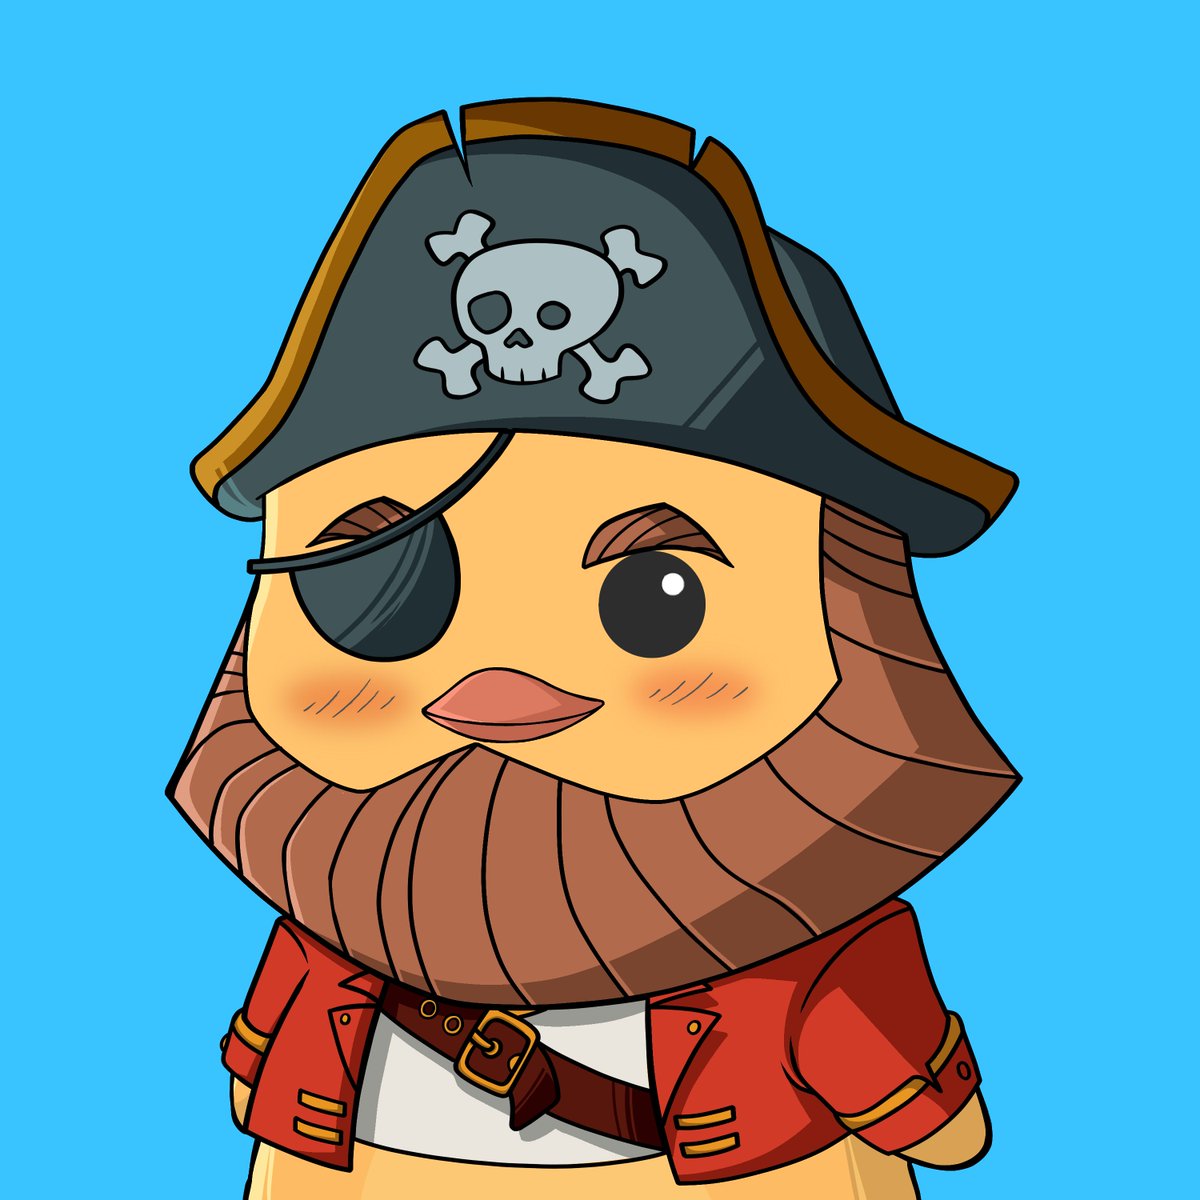 Yo ho ho! ⚓

The Pirate Duckling has arrived to rule the waves of @SeiNetwork! 🌊

Fear not, #Seilors, this adorable companion won't cause ye harm. In fact, he's your best buddy! 🙃

You might even ask him for a 𝗪𝗵𝗶𝘁𝗲𝗹𝗶𝘀𝘁📝